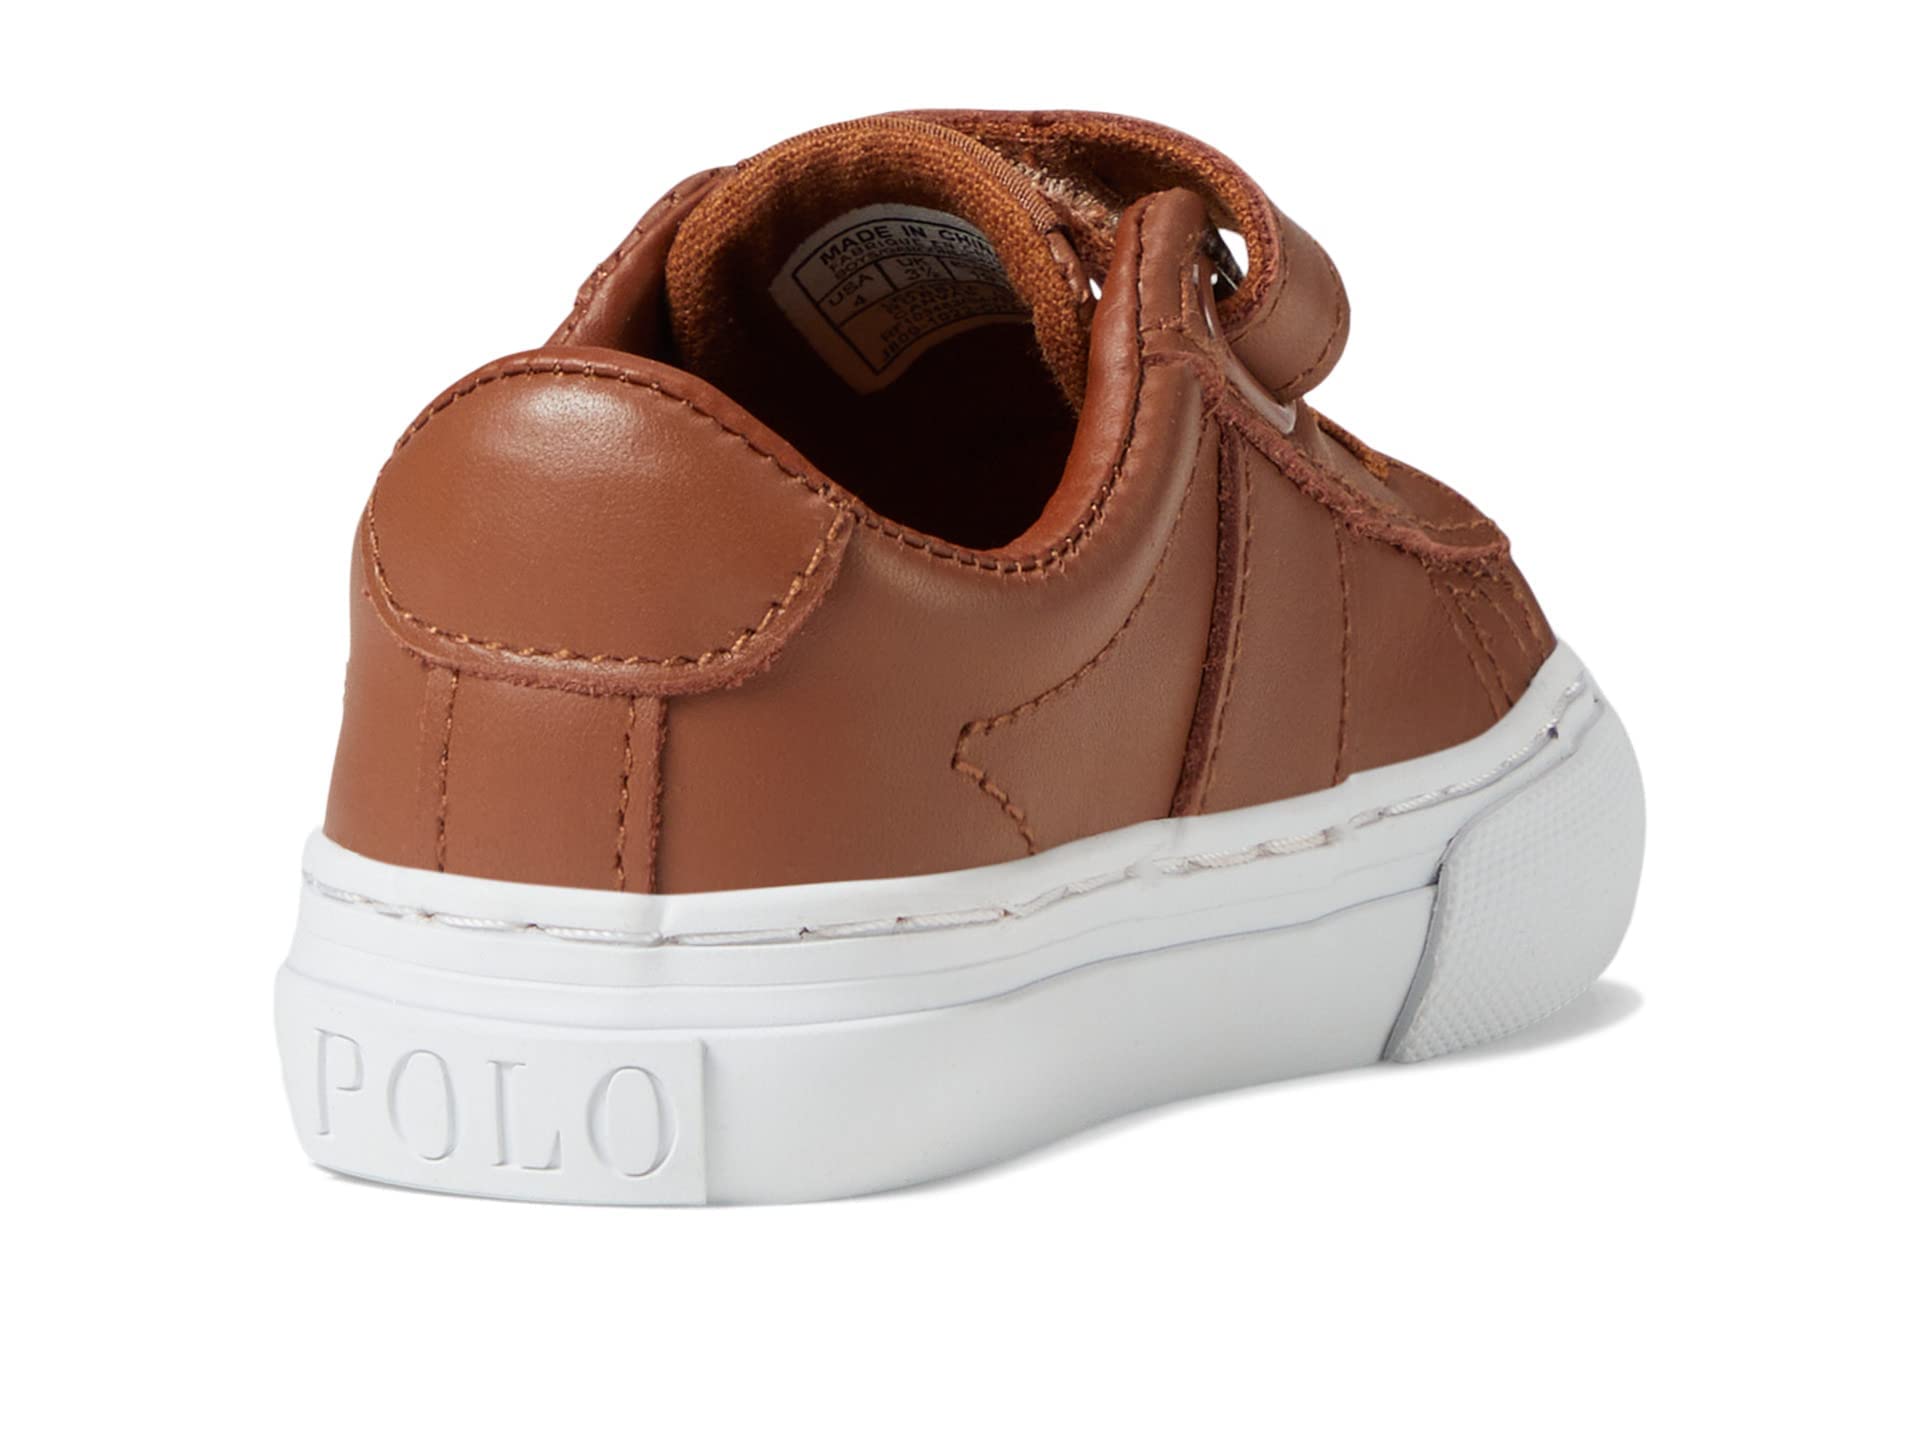 POLO RALPH LAUREN Baby Boy's Sayer Leather (Toddler)